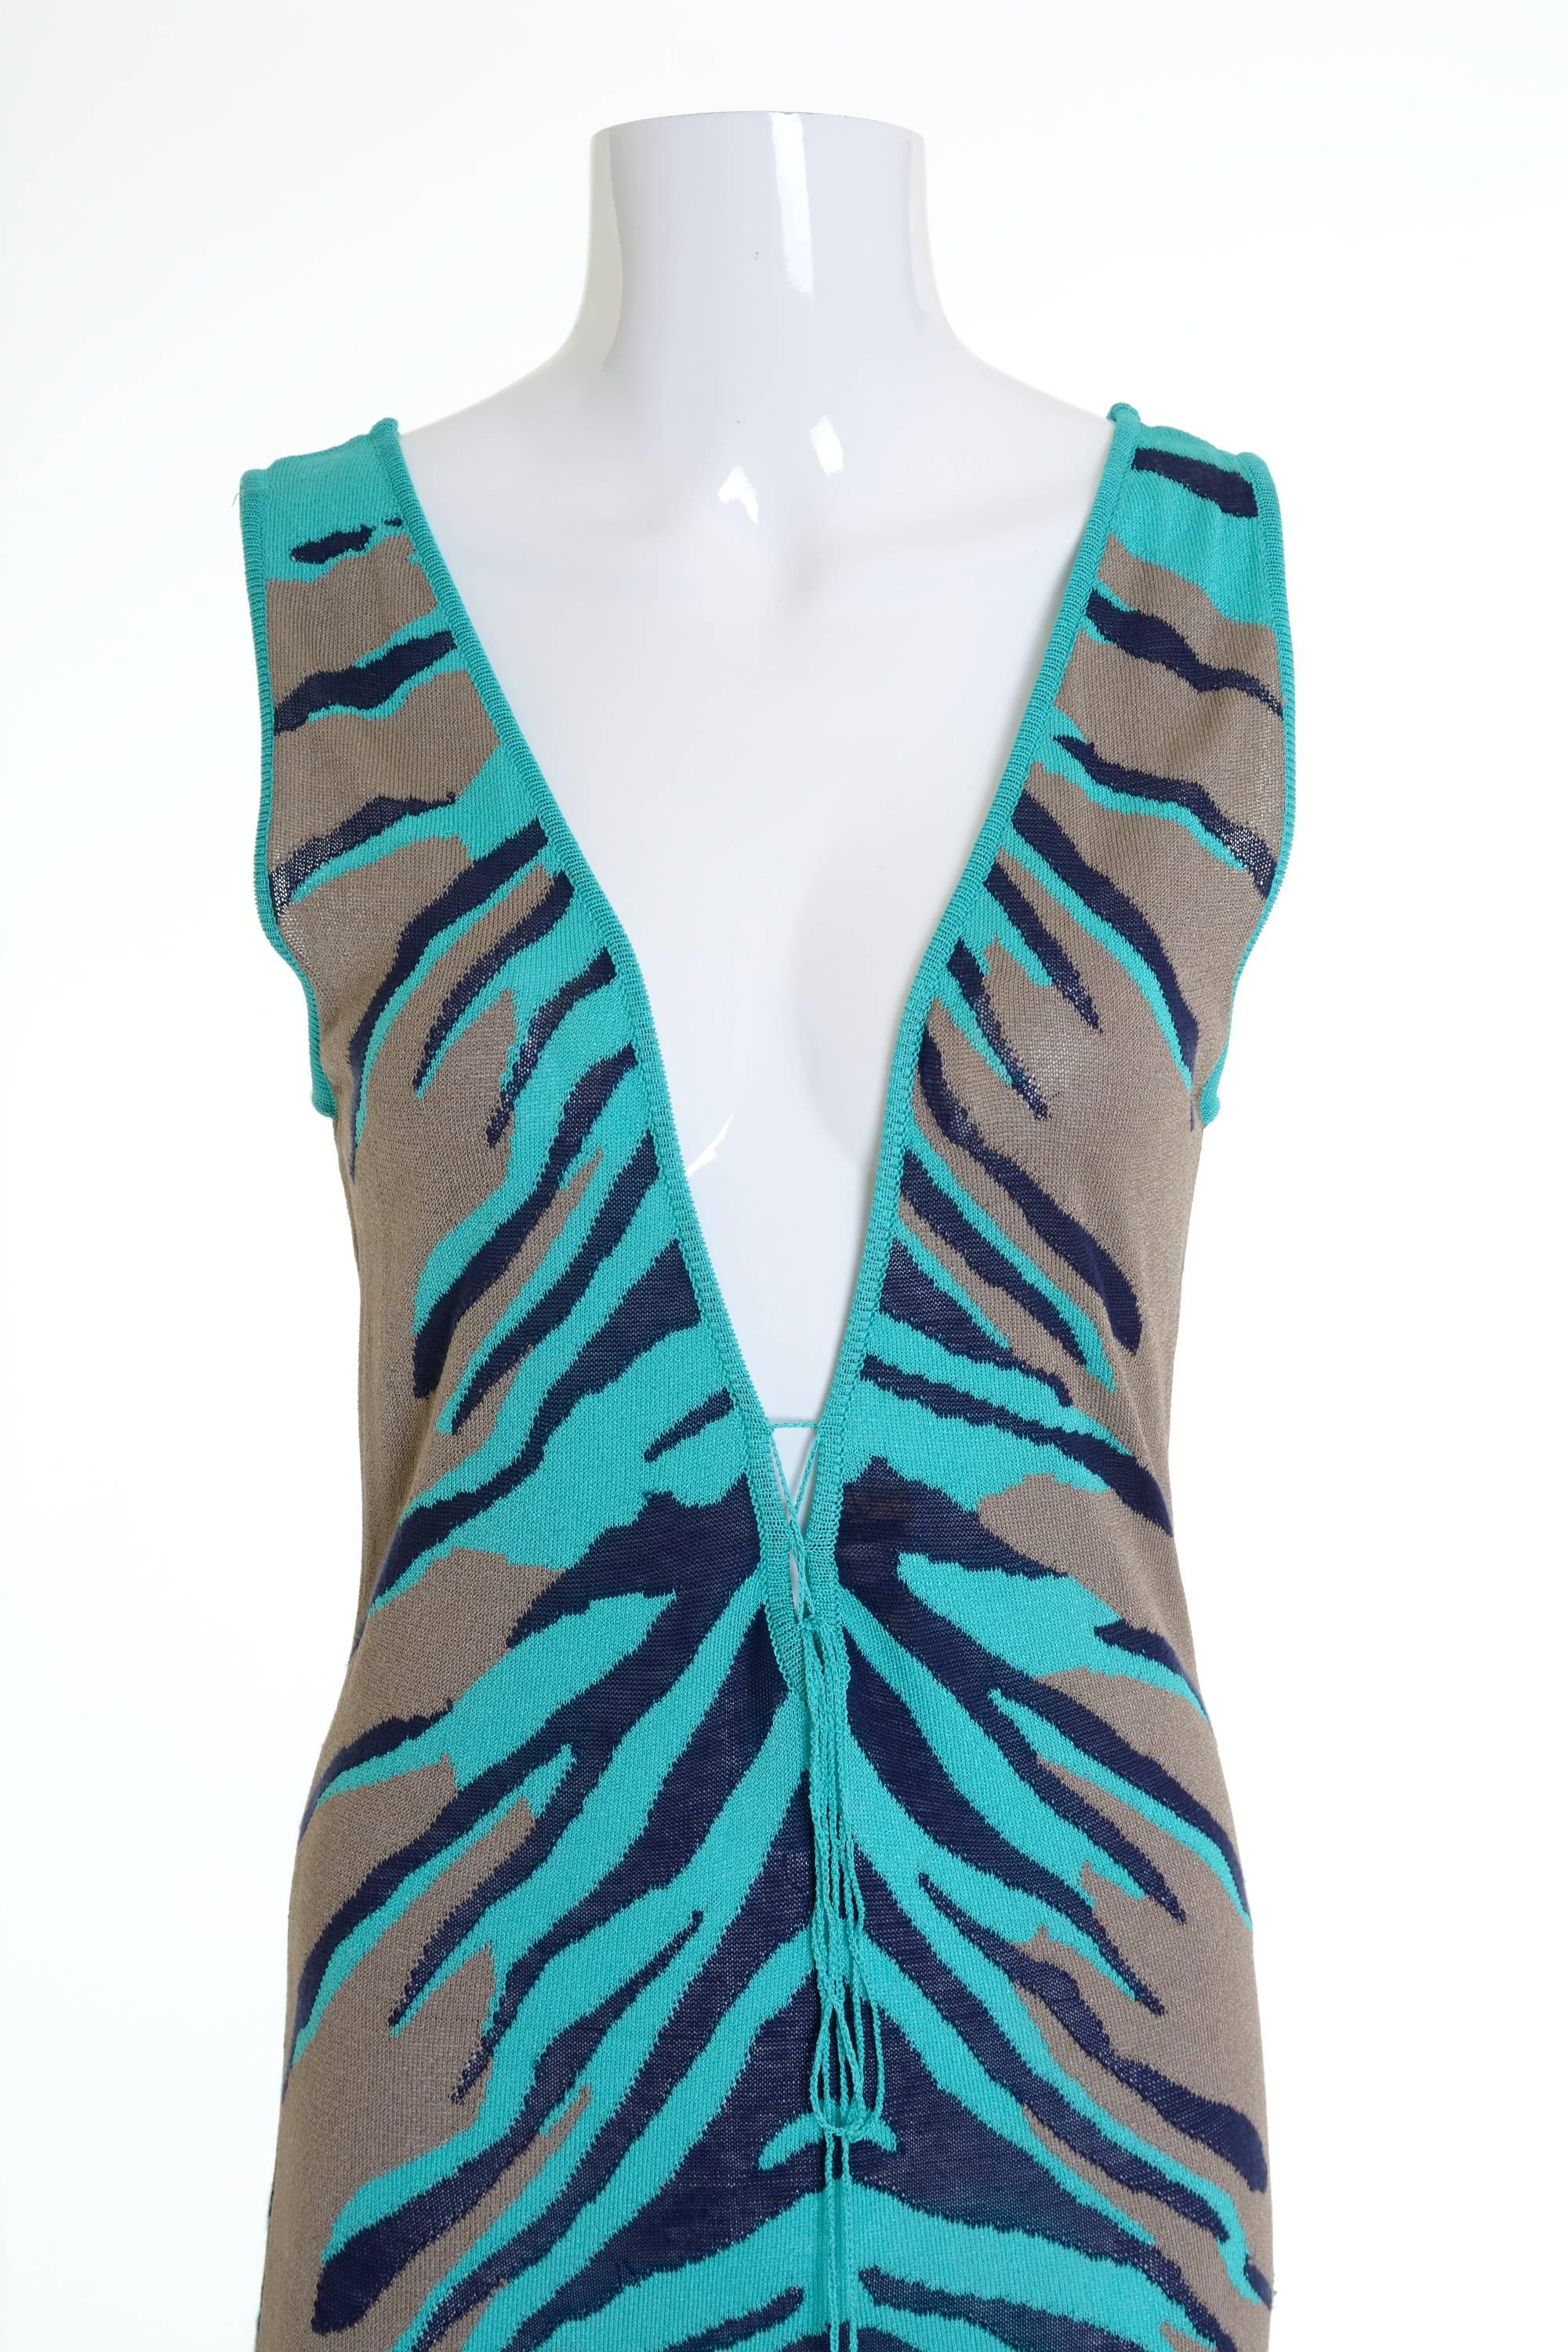 1980s KRIZIA Knitted Zebra Print Long Dress In Excellent Condition For Sale In Milan, Italy